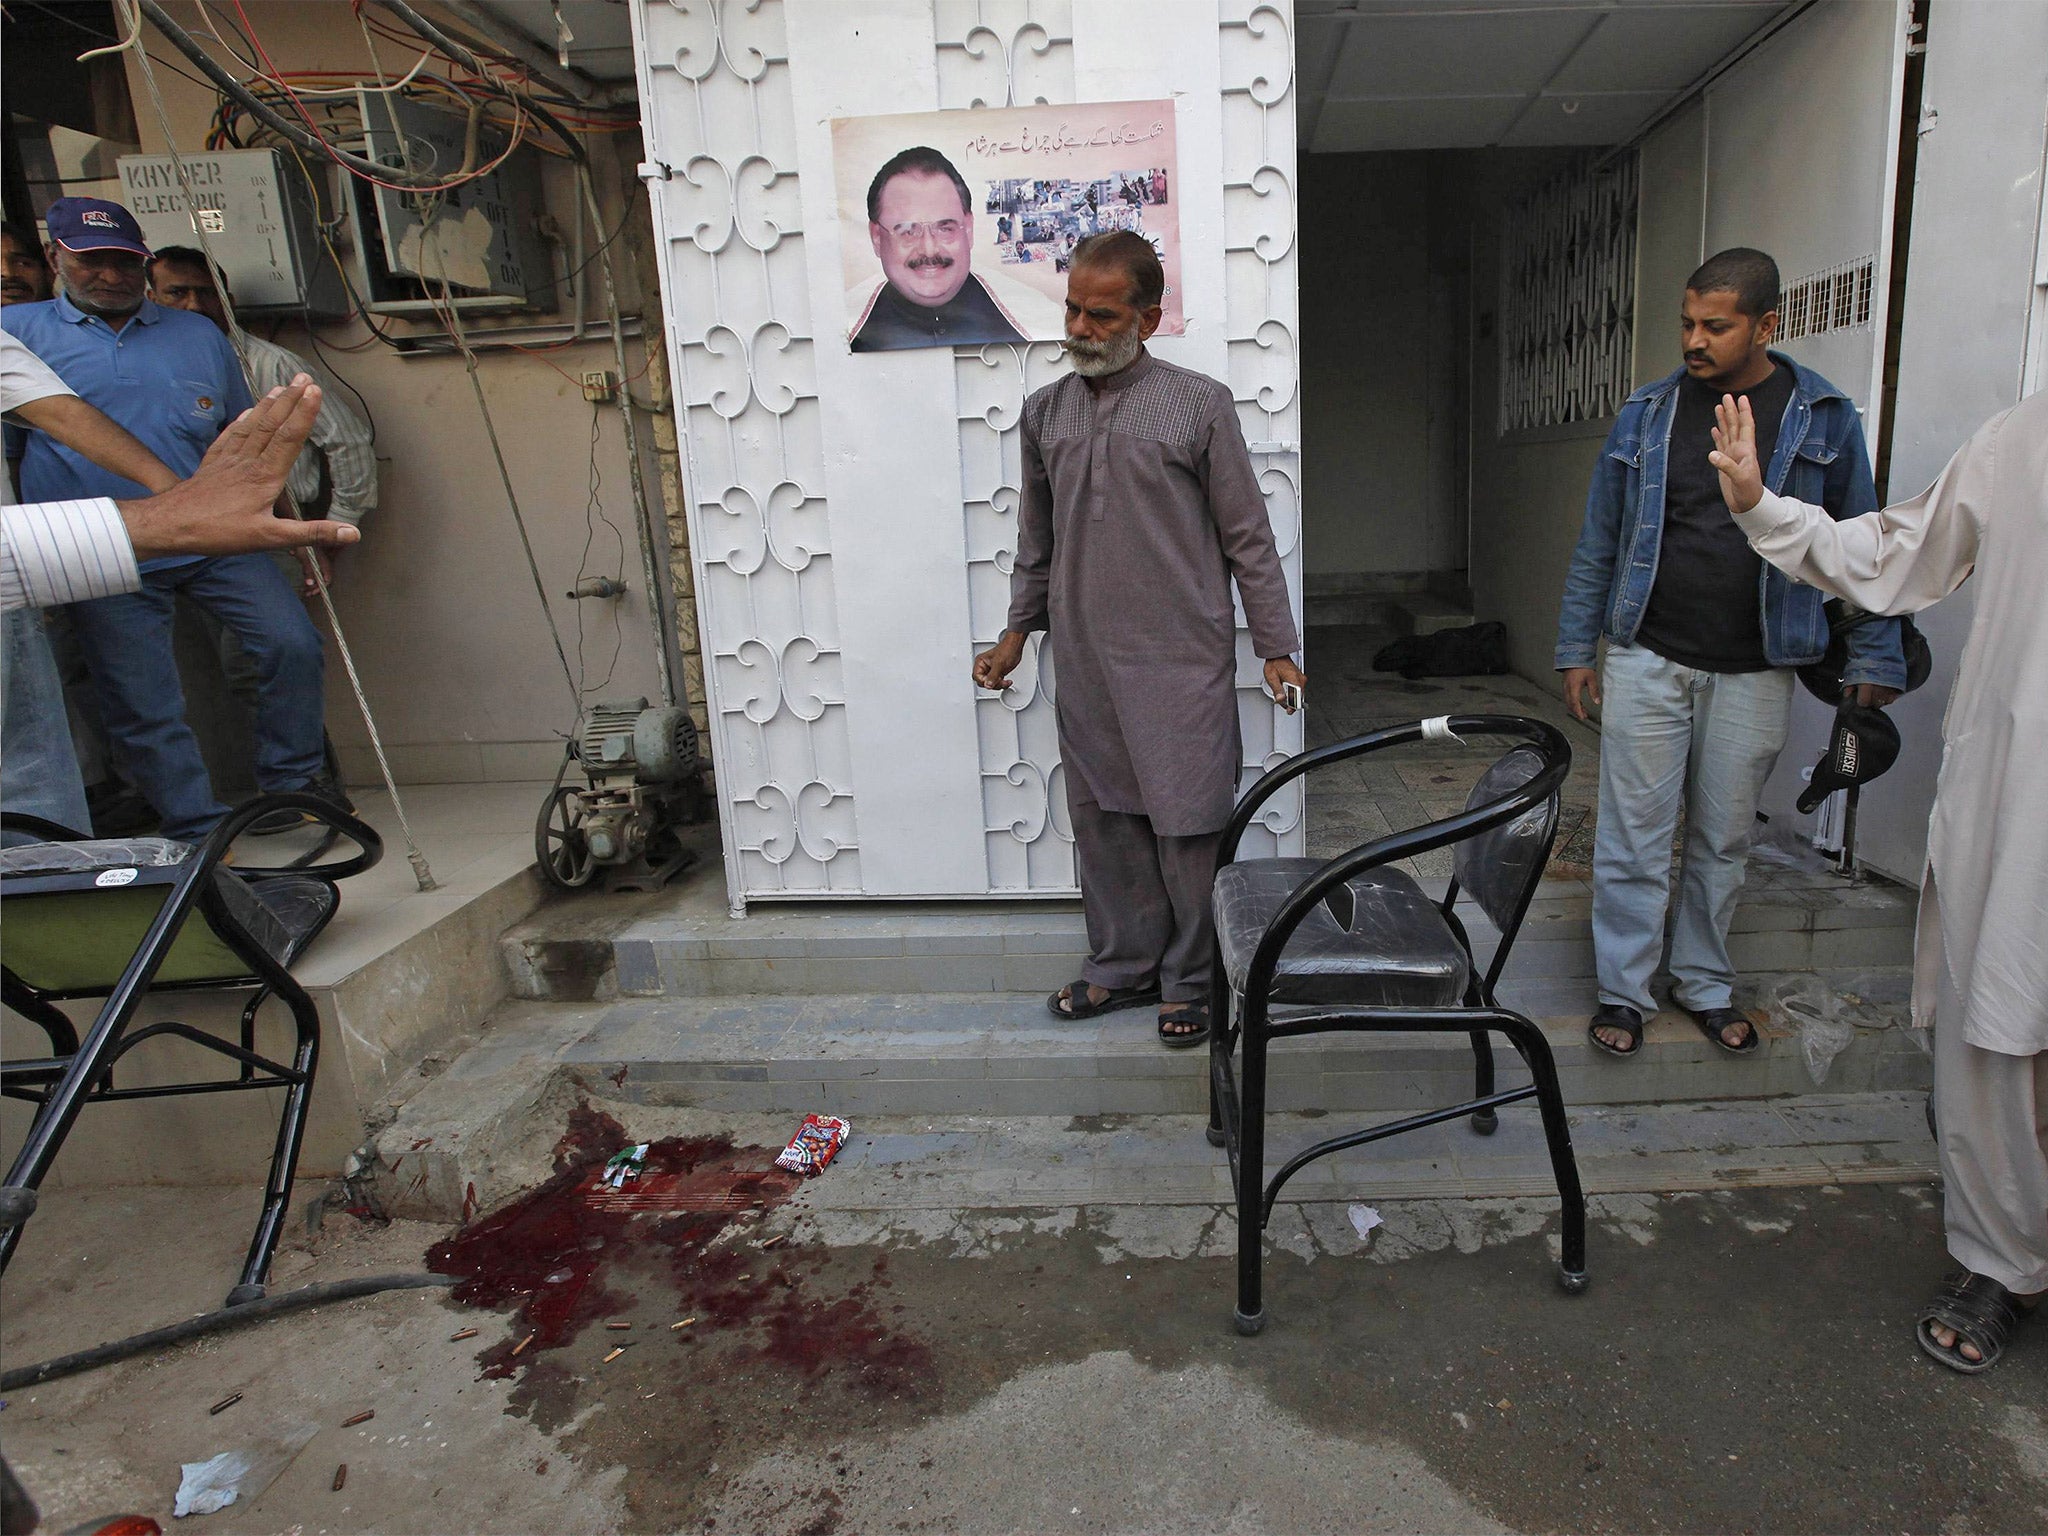 Residents gather beside blood stains on ground outside the MQM office